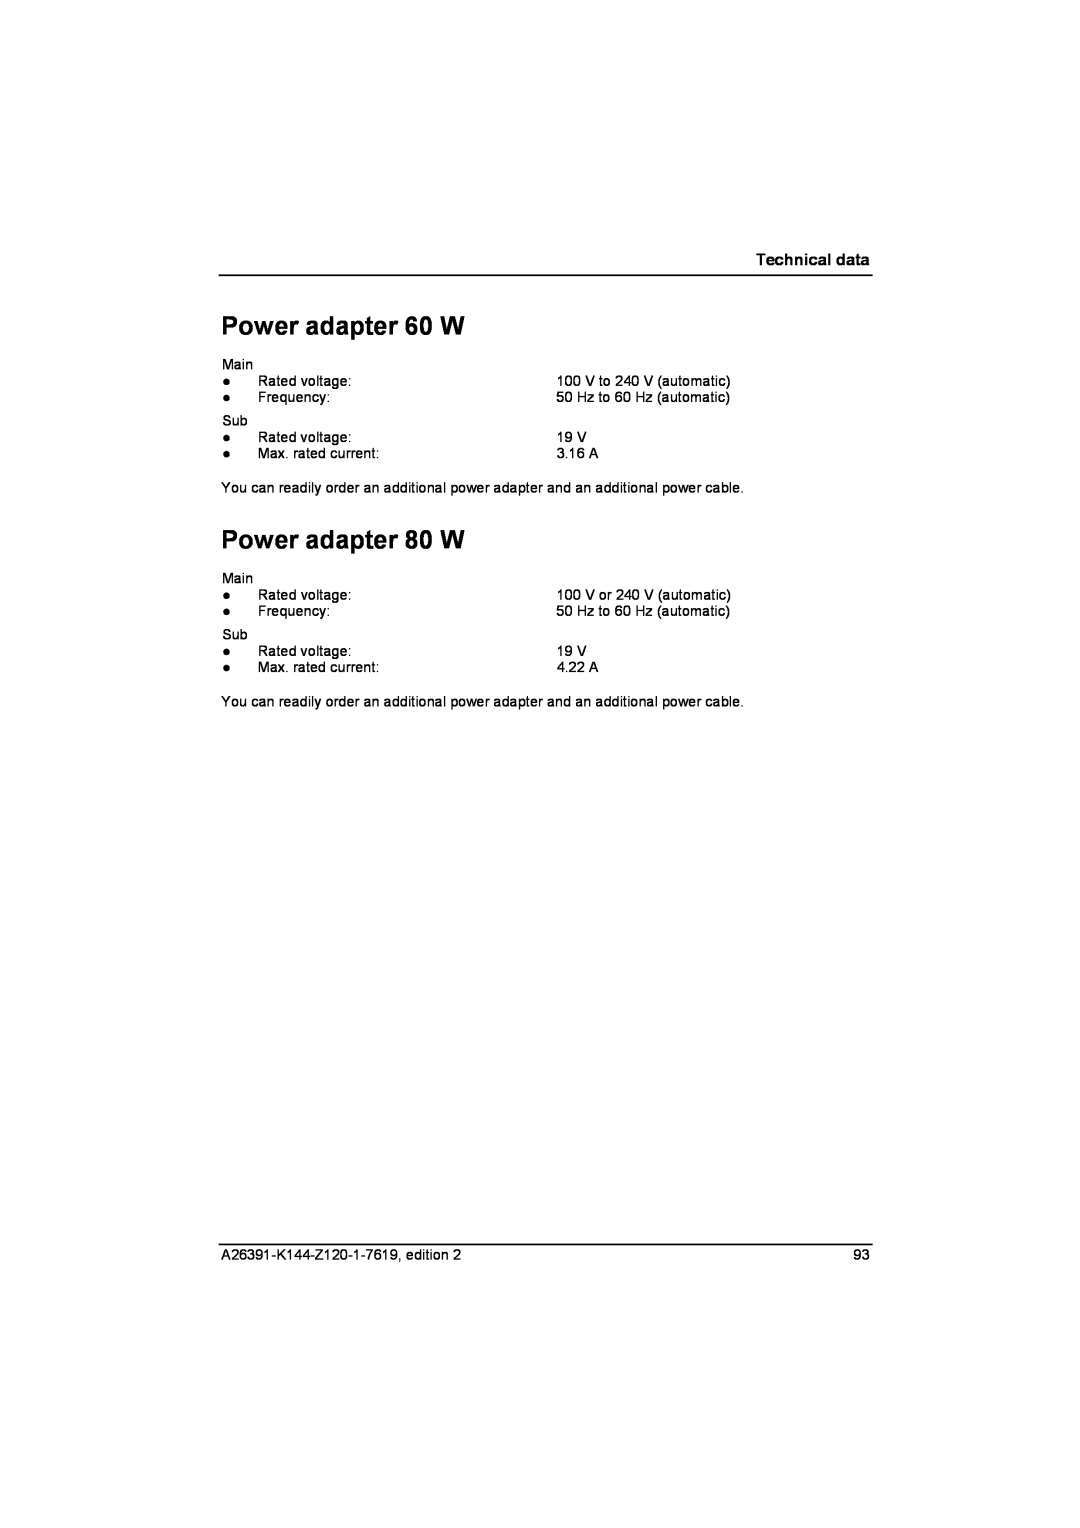 Fujitsu S SERIES manual Power adapter 60 W, Power adapter 80 W, Technical data, V to 240 V automatic, V or 240 V automatic 